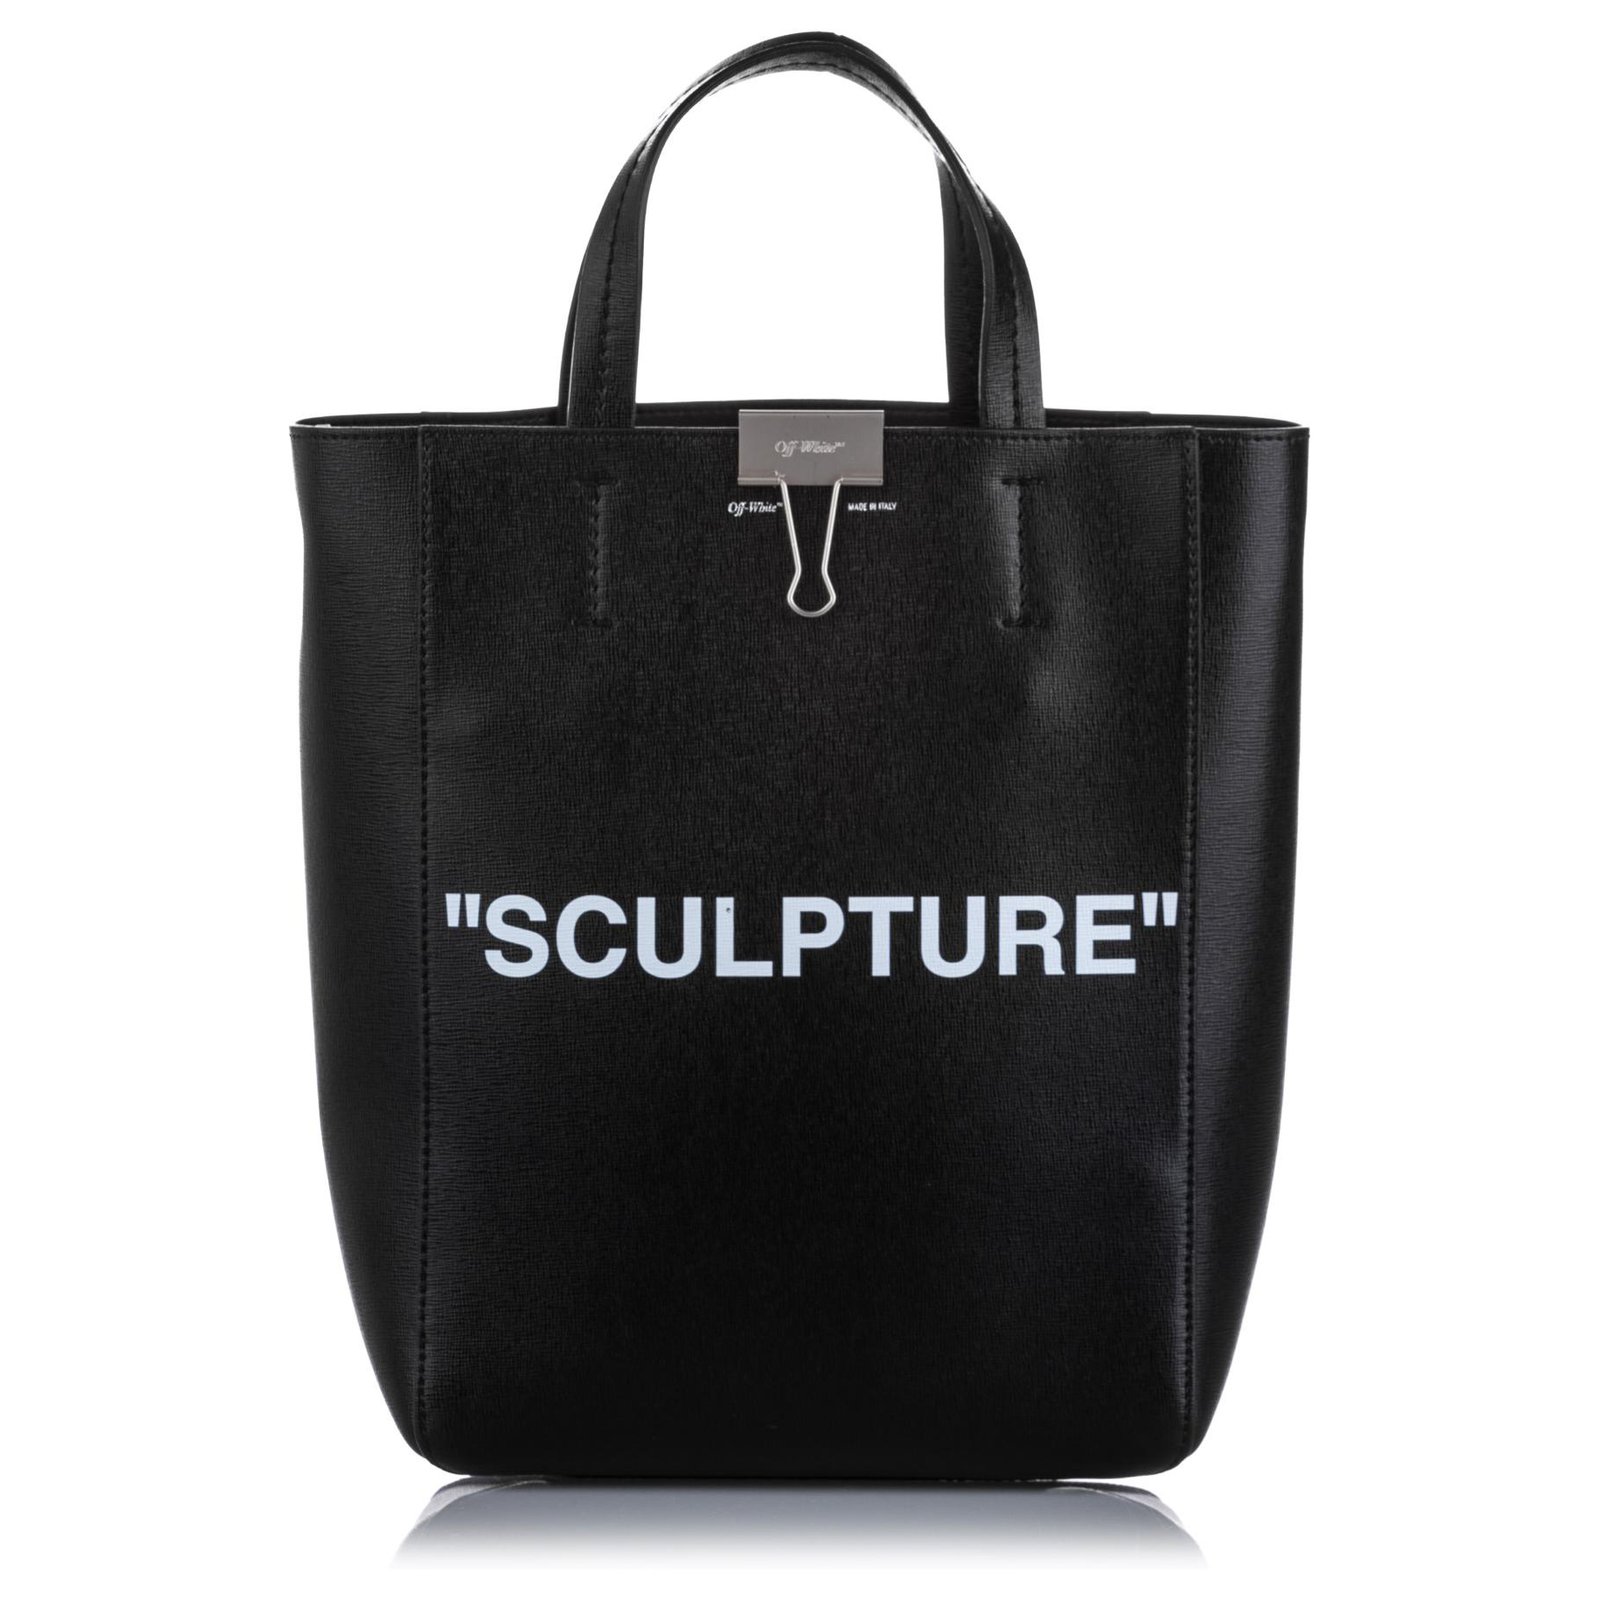 Off White Black Medium Sculpture Leather Tote Bag Pony-style